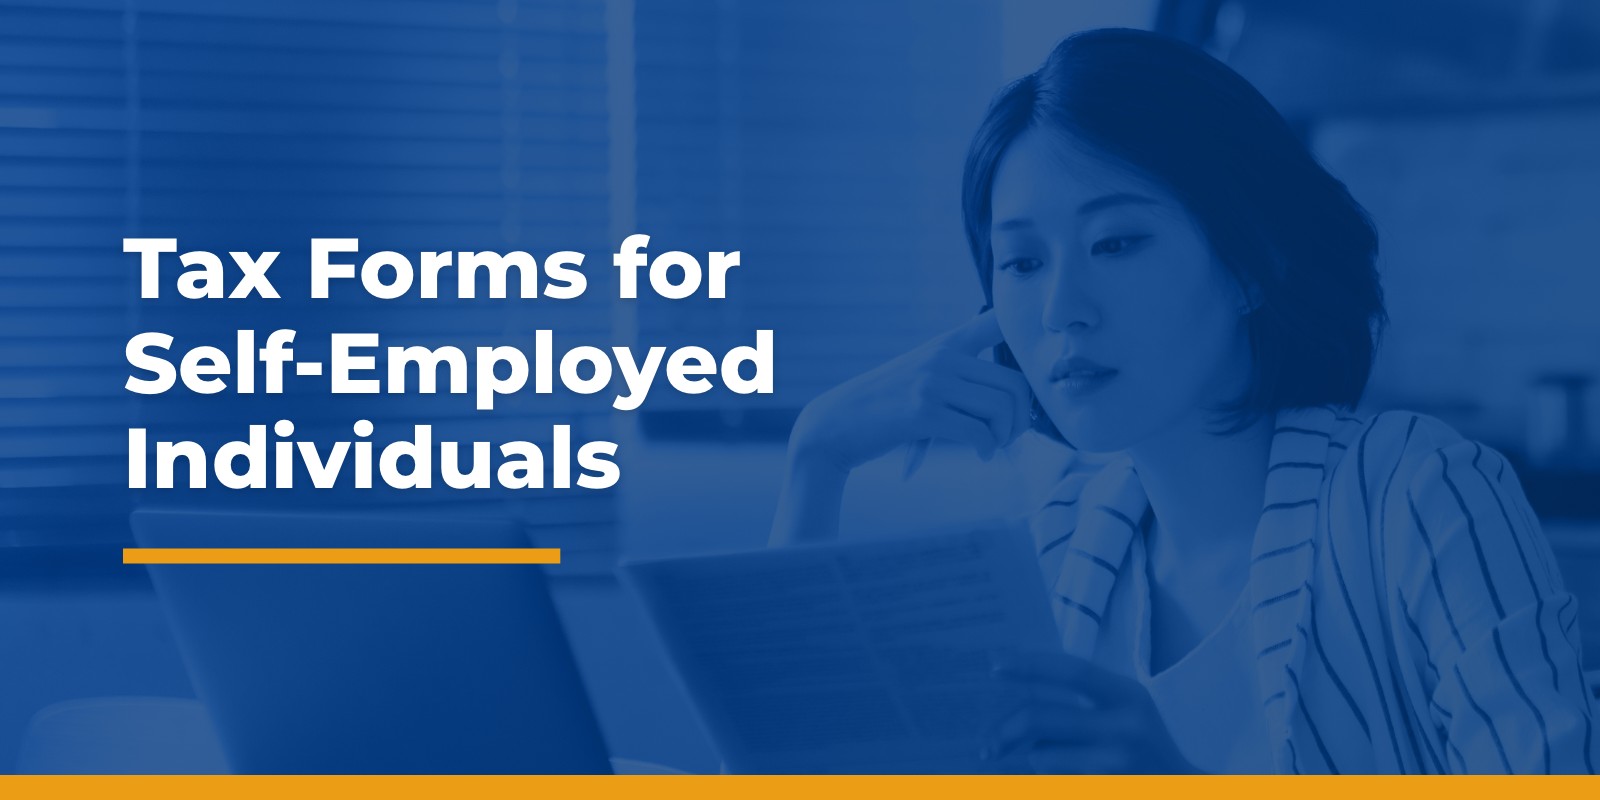 tax forms for self-employed individuals